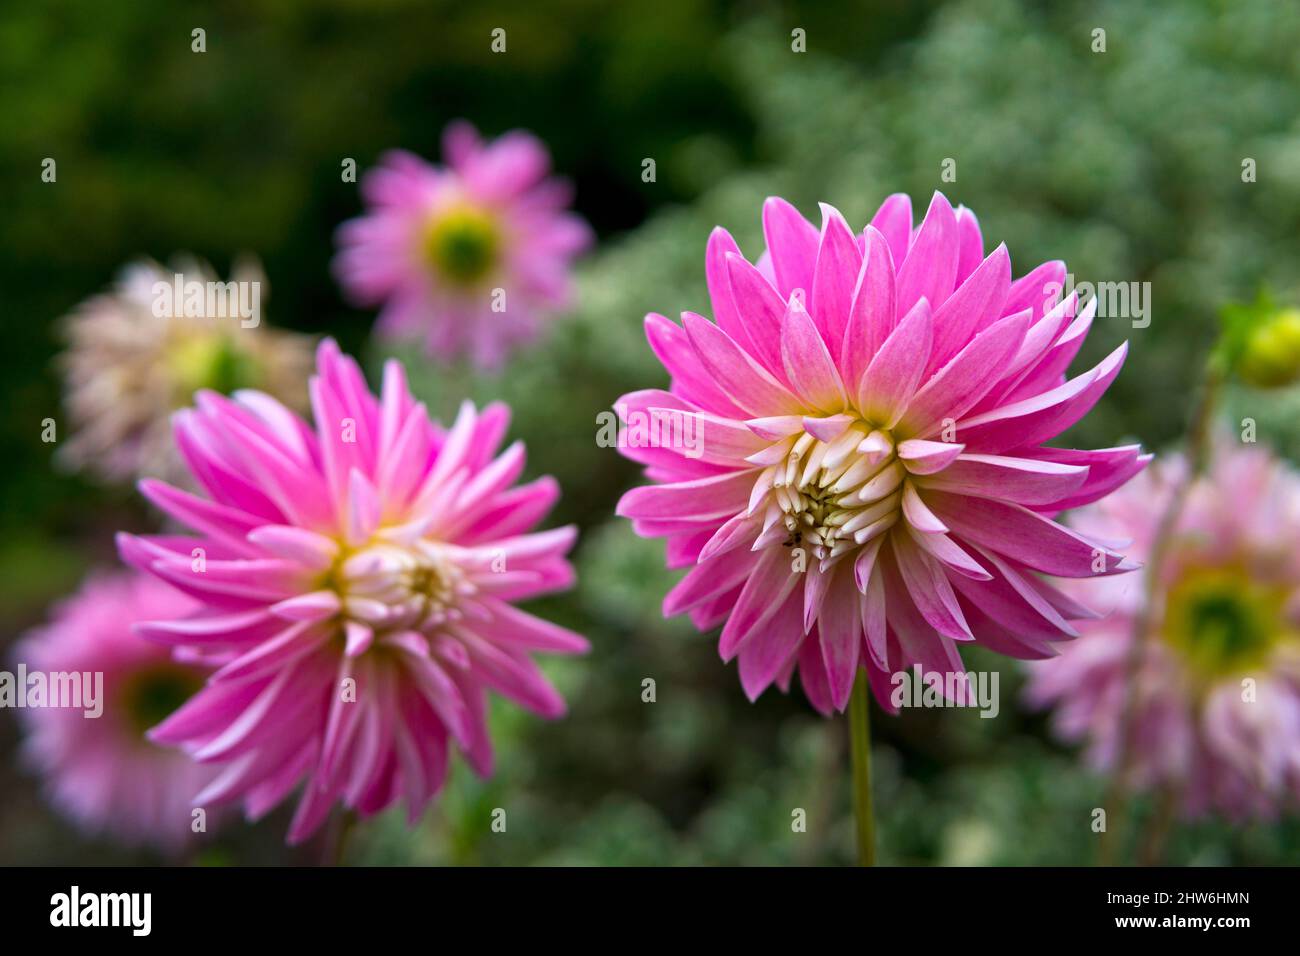 Vibrant pink and white cactus dahlias growing in the garden. Stock Photo